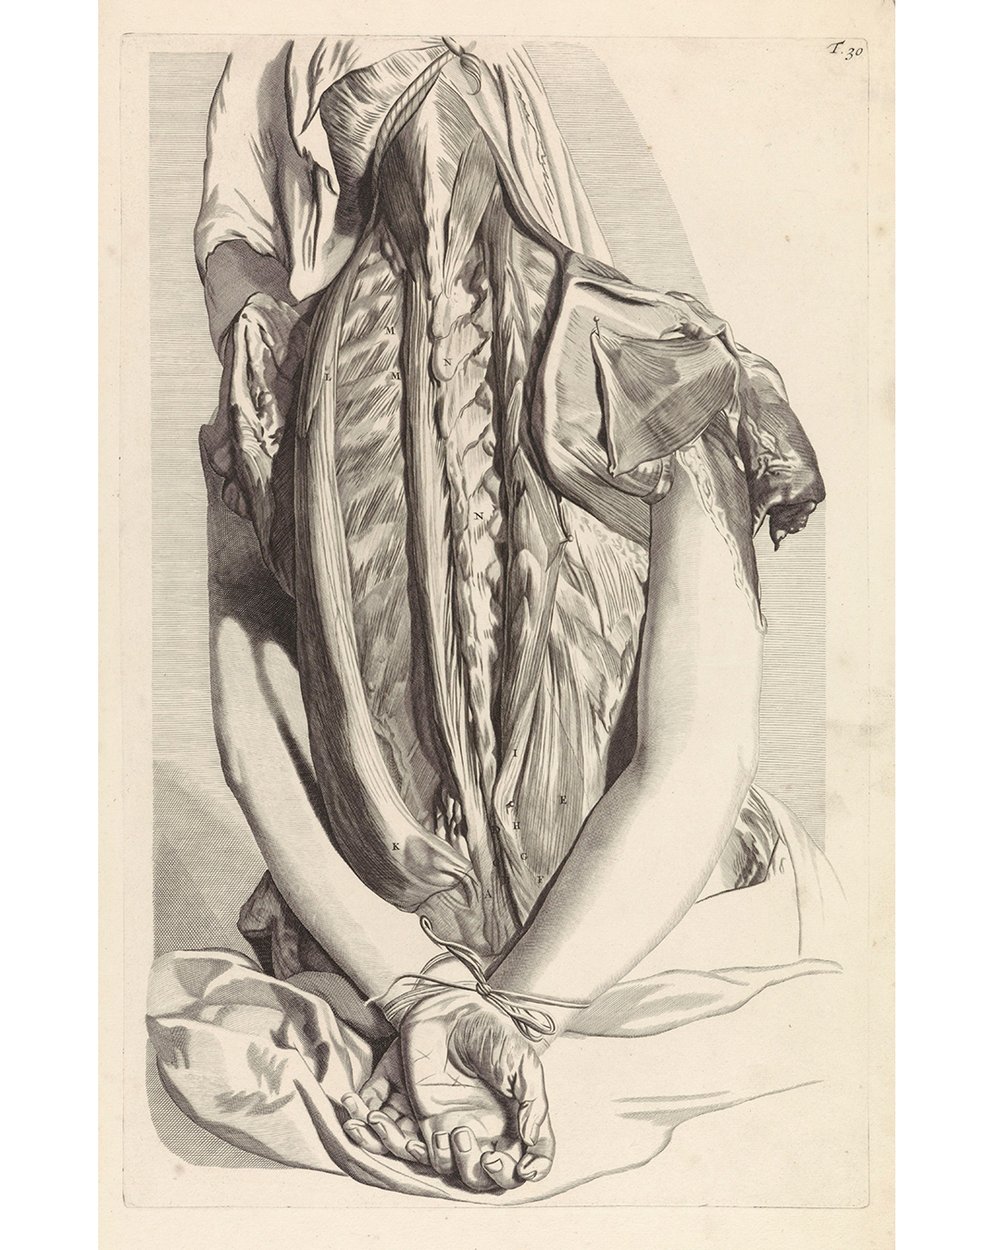 "Anatomical study of the back and upper arms of a tied up woman" (1685)